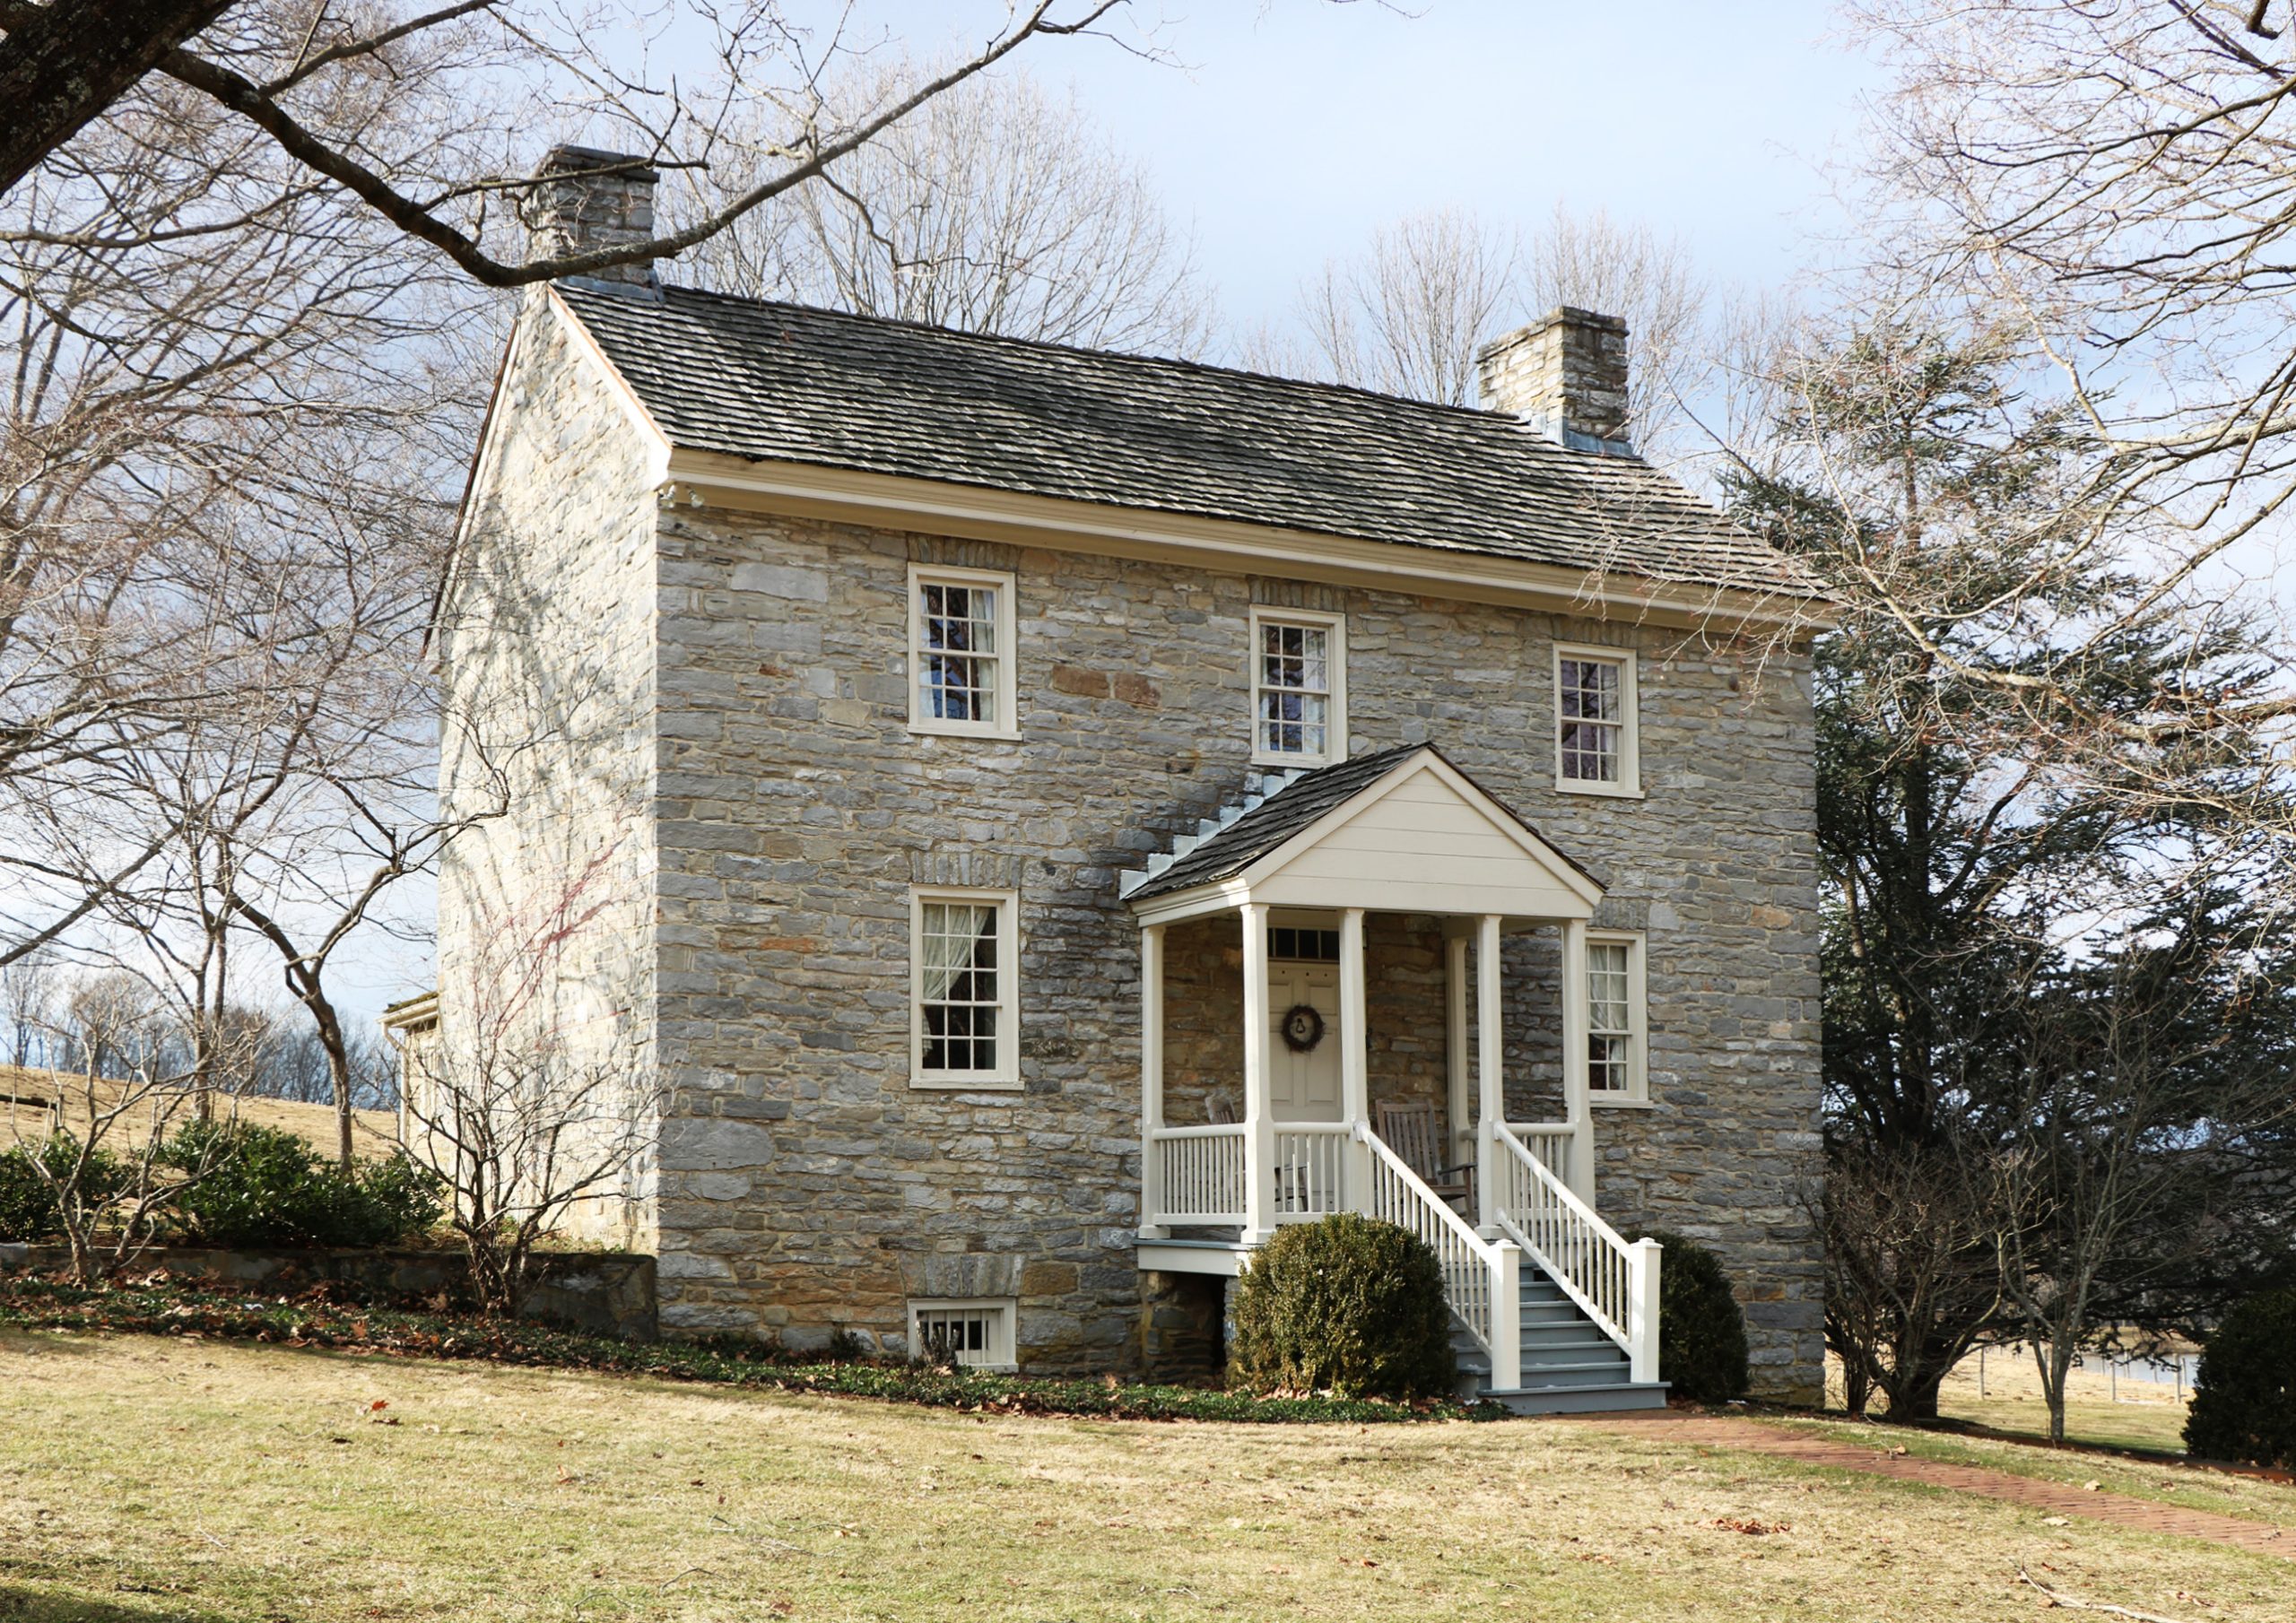 081-0032_Kennedy-Lunsford_Farm_2022_exterior_front_elevation_VLR_Online-scaled